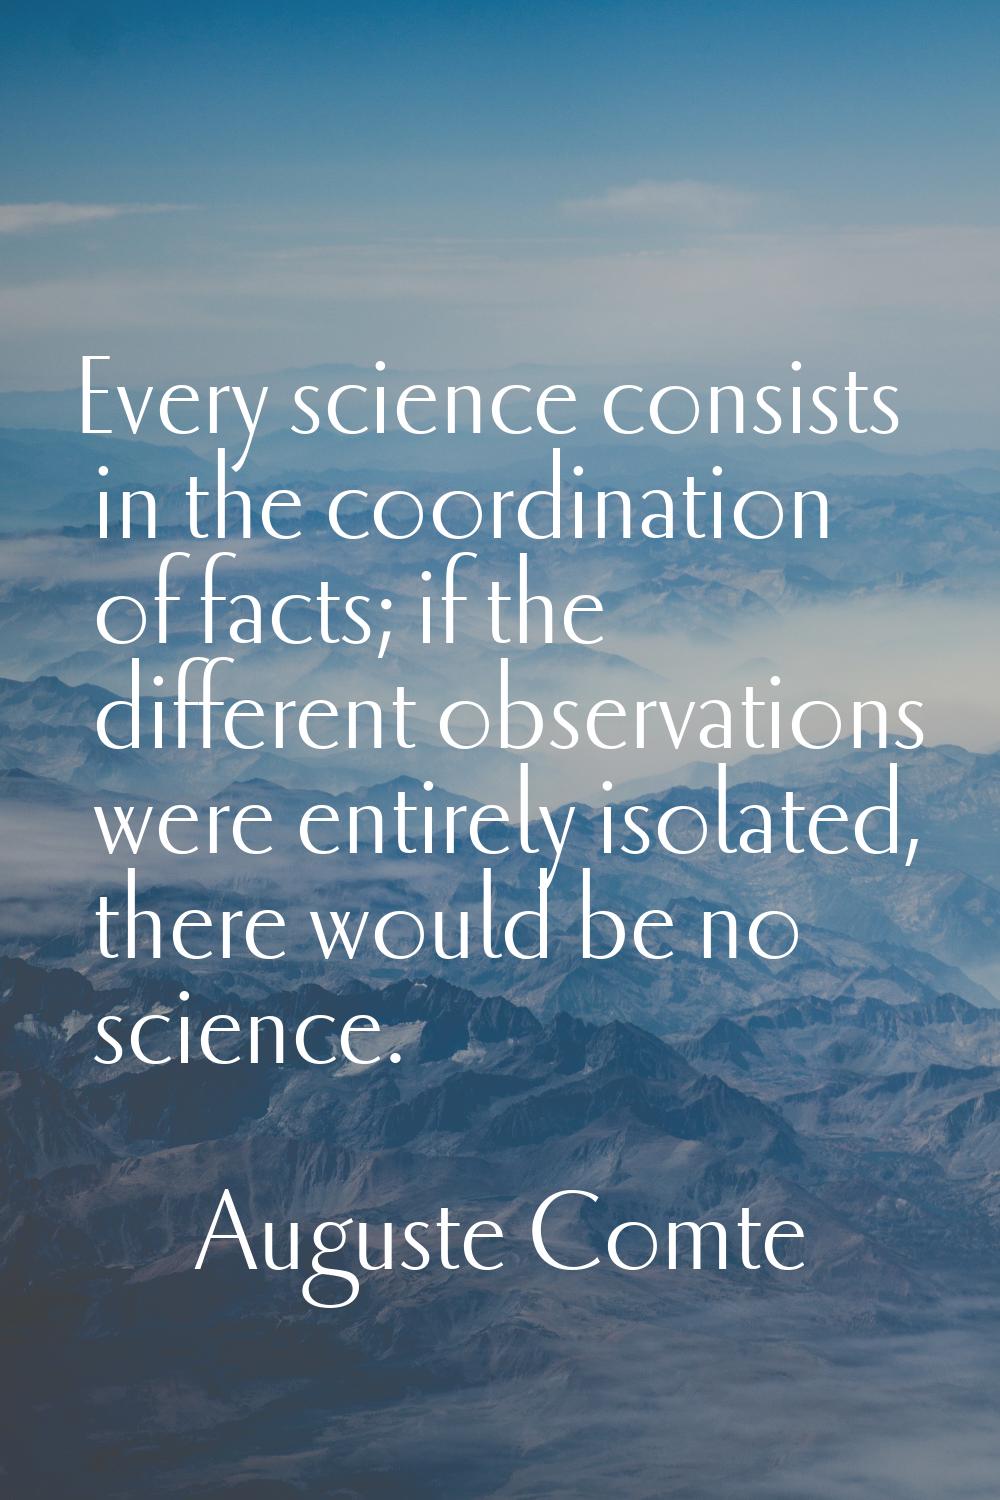 Every science consists in the coordination of facts; if the different observations were entirely is